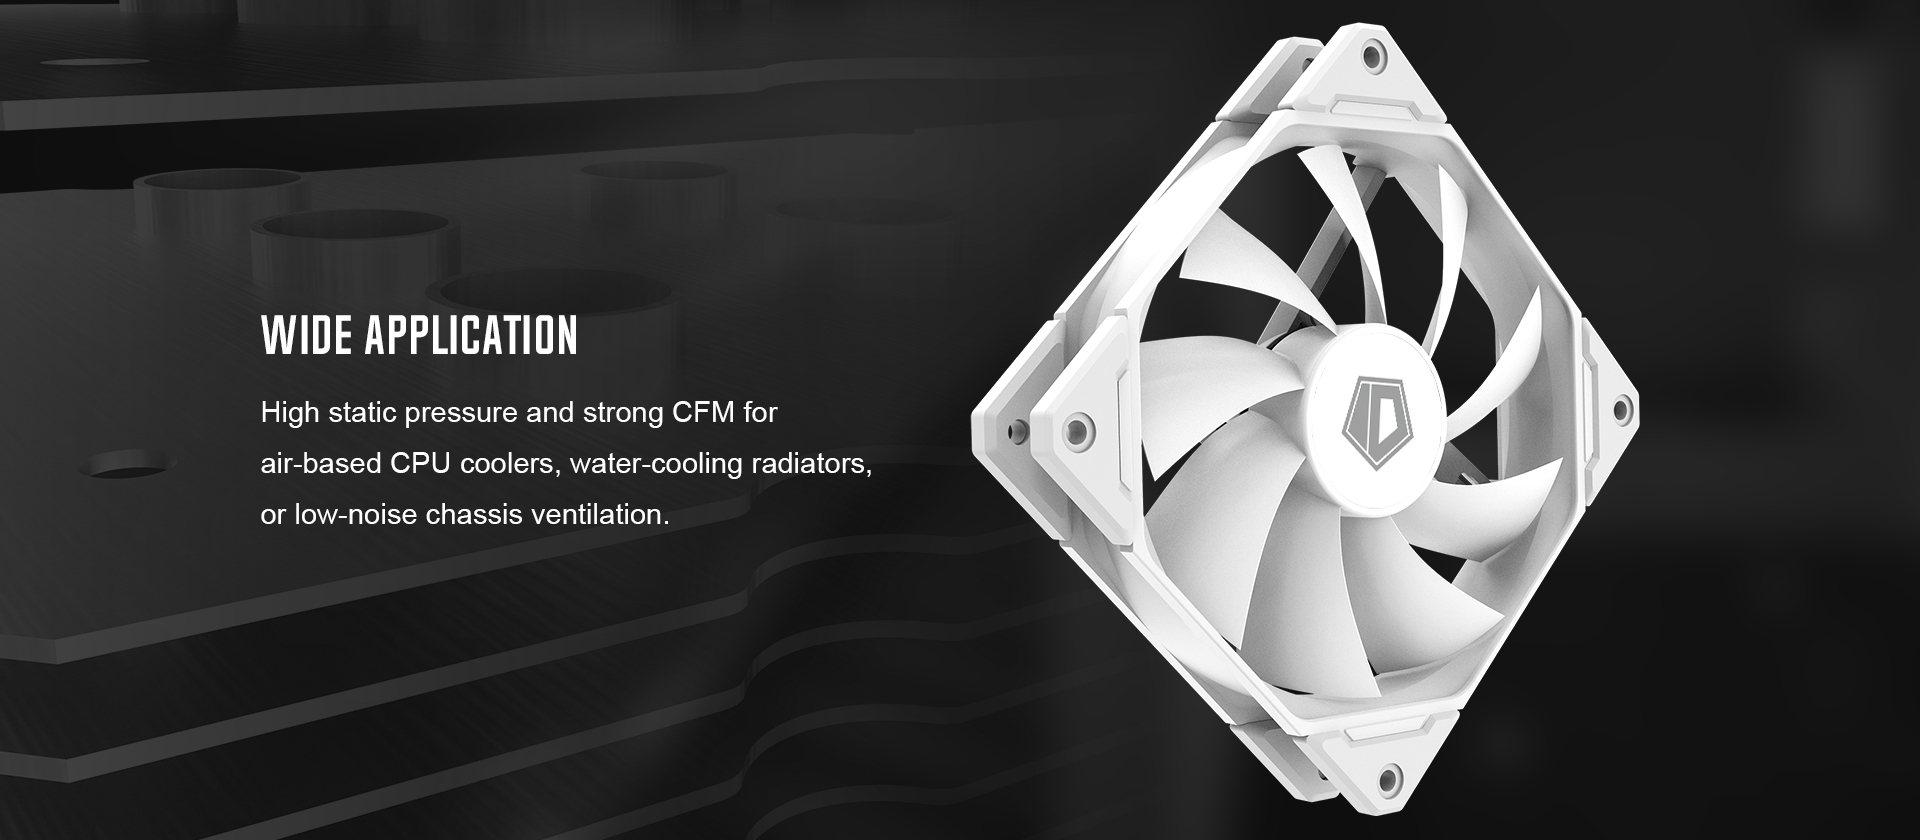 A large marketing image providing additional information about the product ID-COOLING TF Series 120mm ARGB Case Fan Triple Pack - Snow Edition - Additional alt info not provided